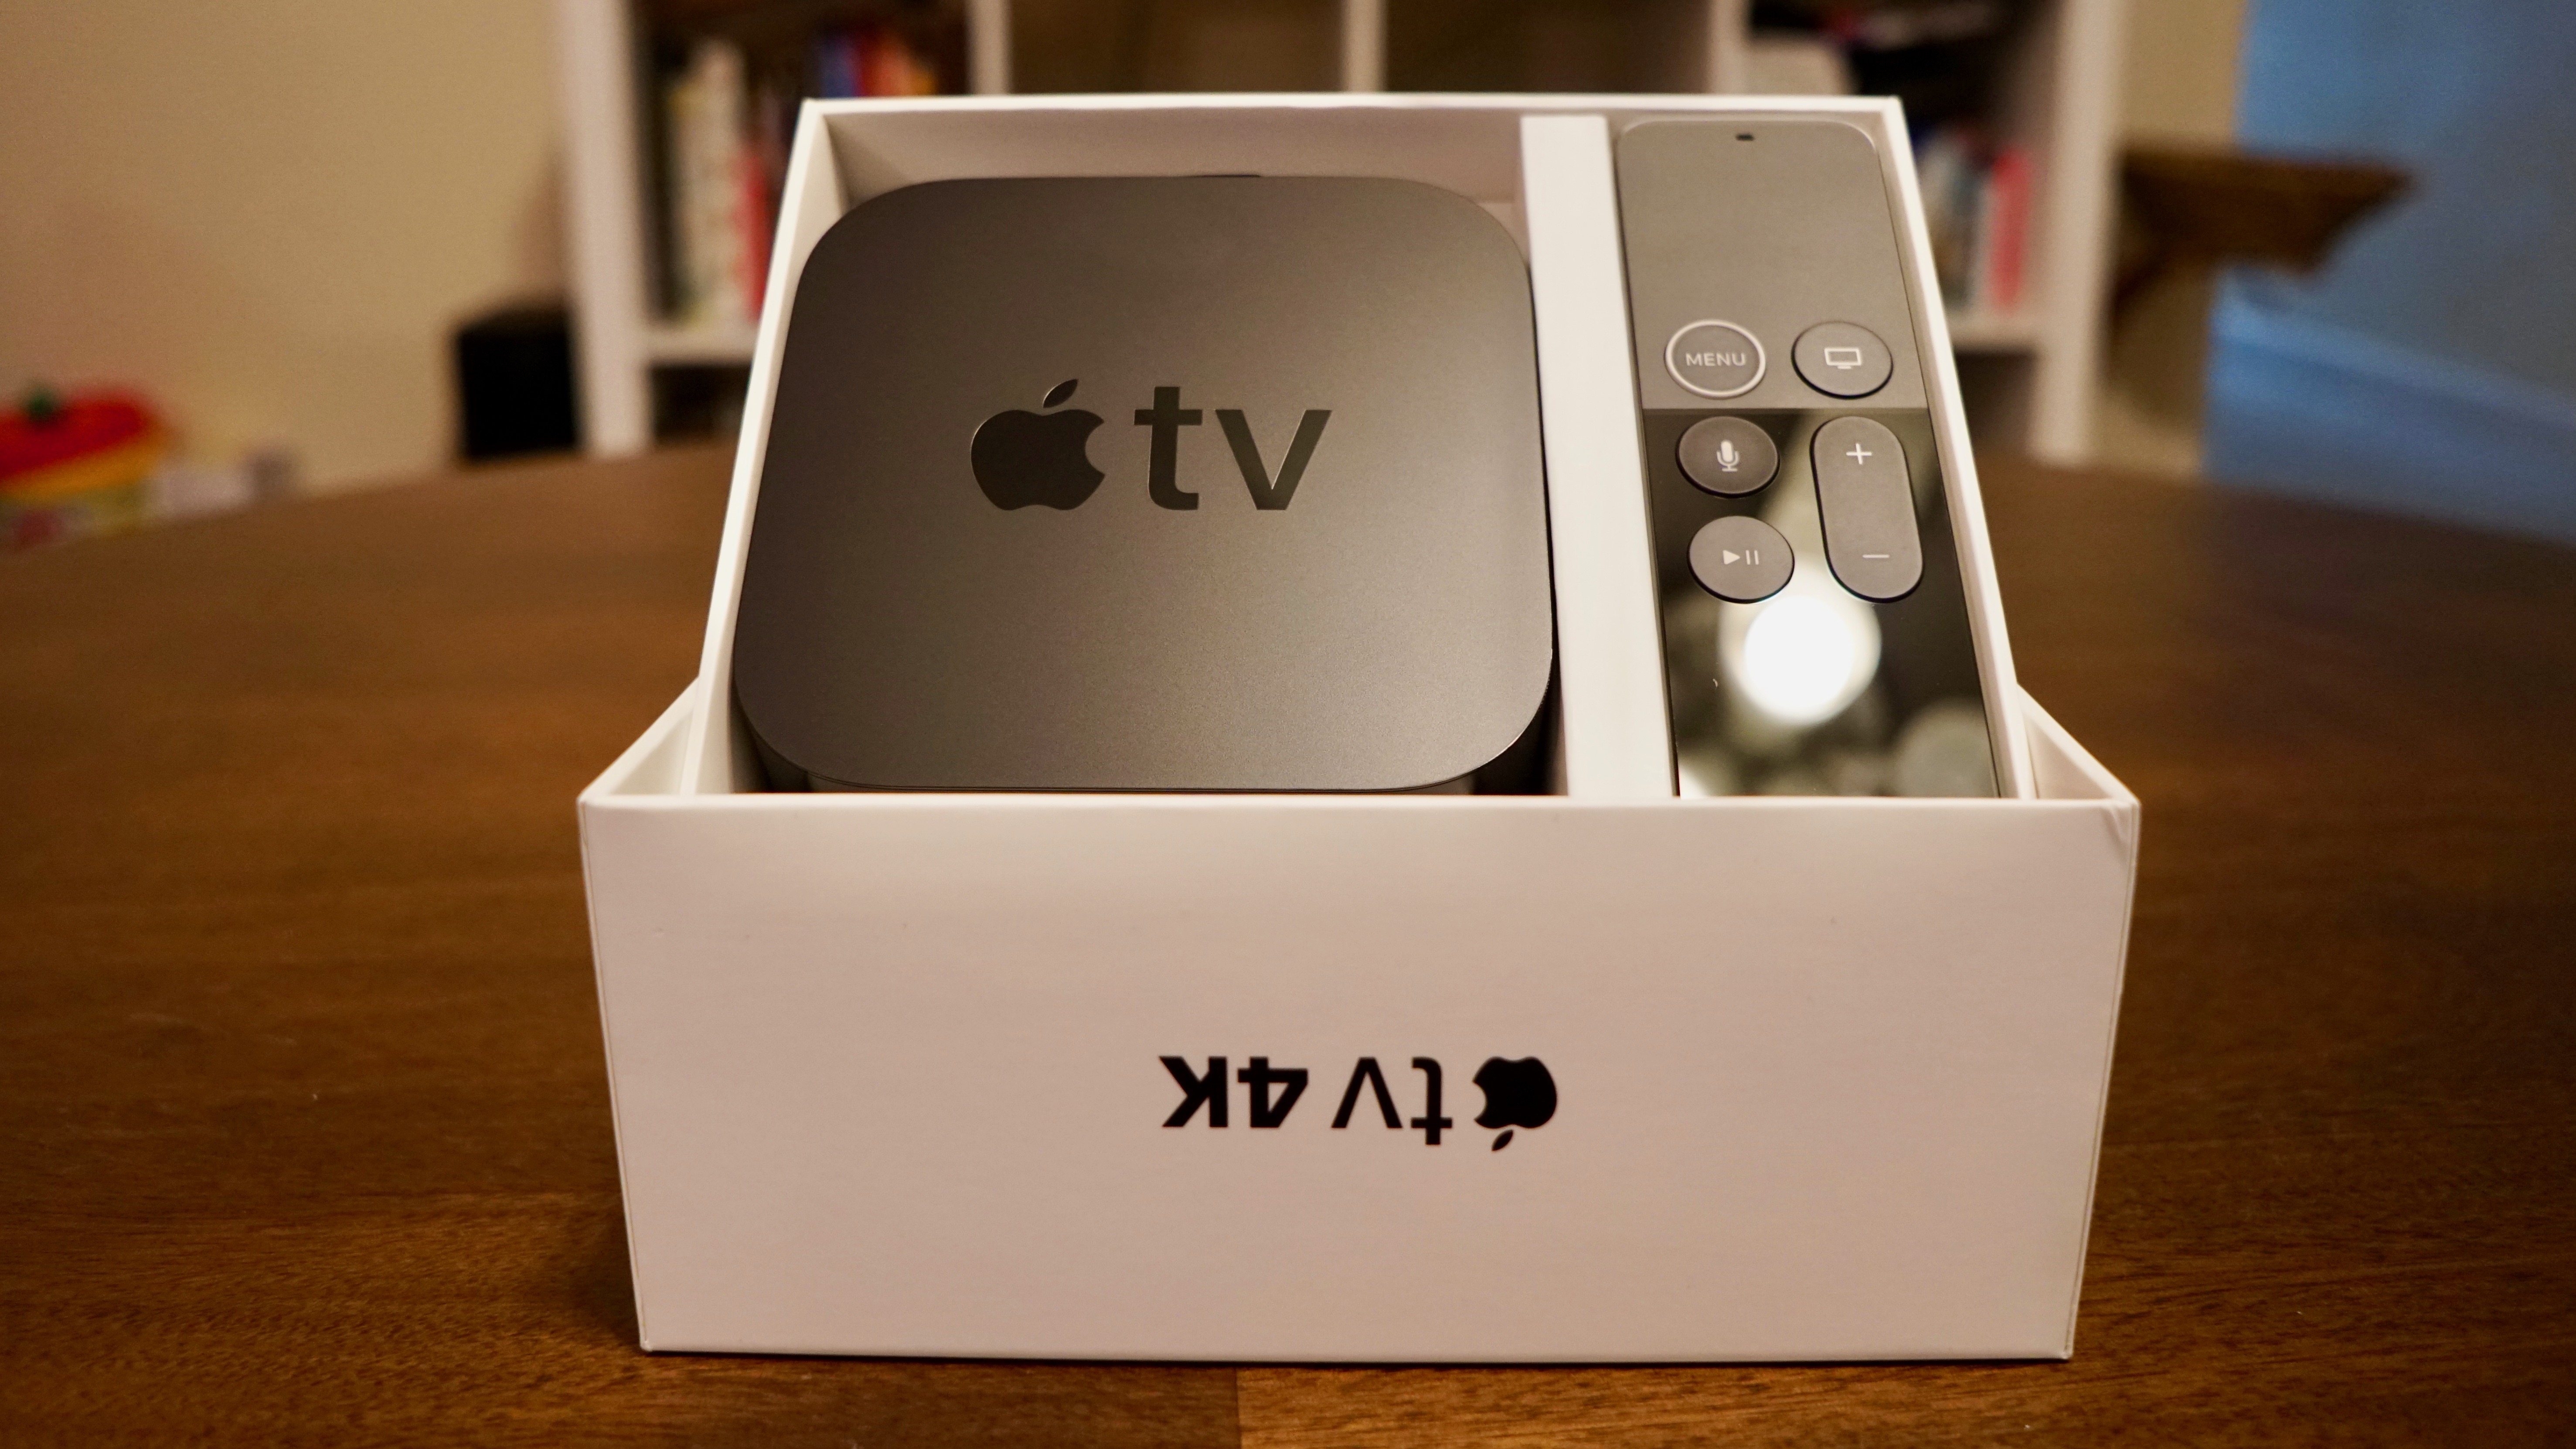 fødsel sengetøj Christchurch Hands-on with Apple TV 4K and the new Siri Remote - 9to5Mac